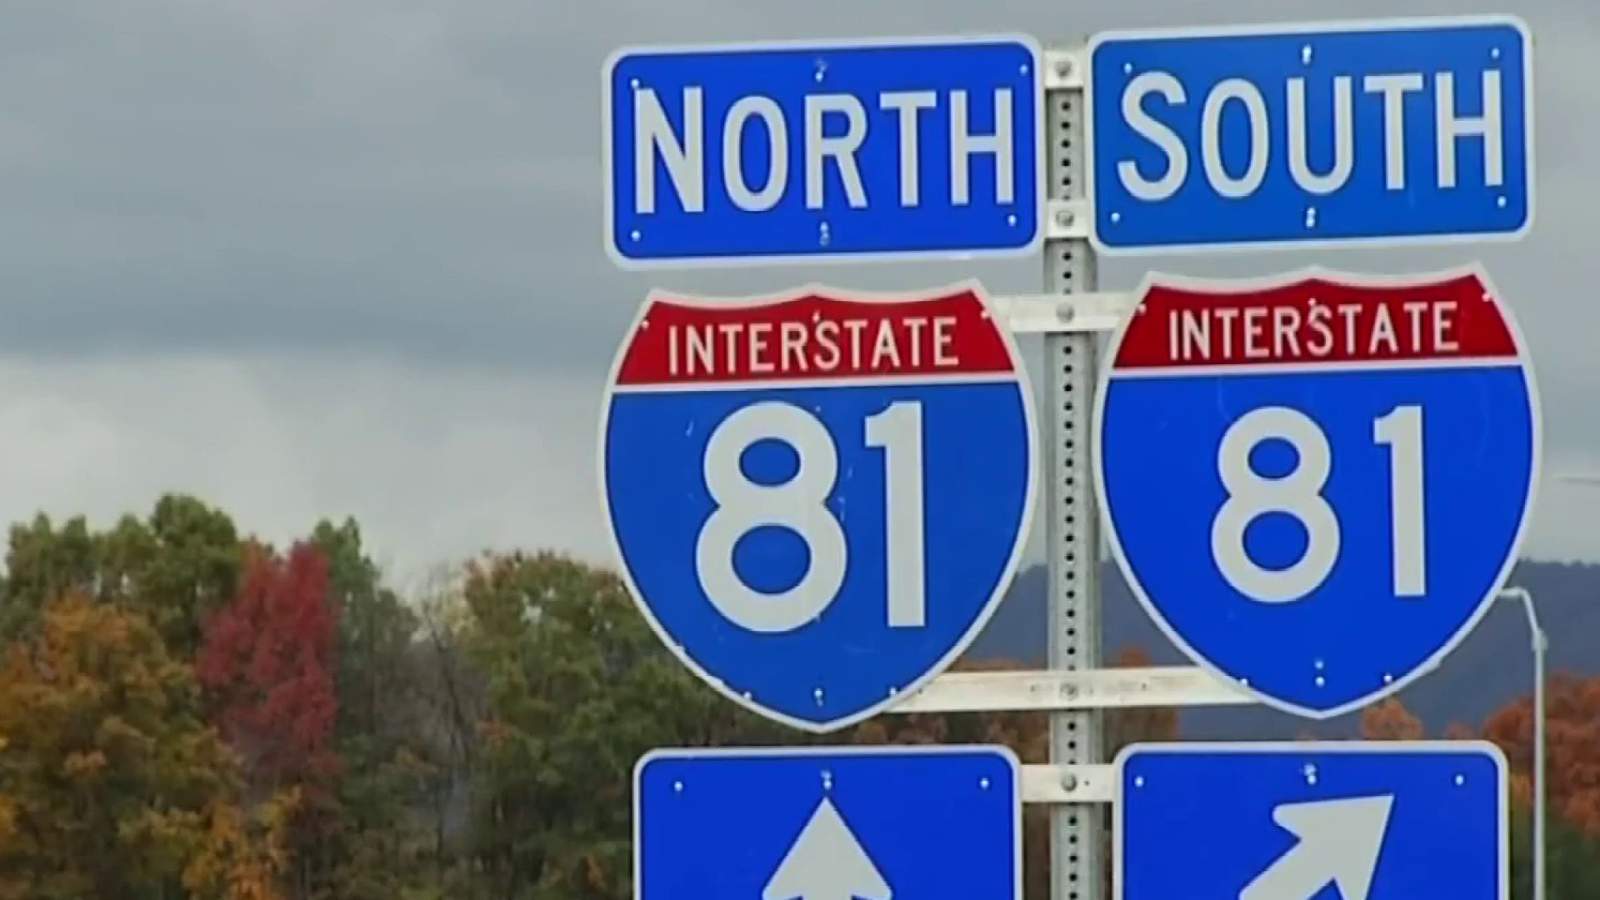 Construction to widen I-81 in Roanoke County to start in spring 2020